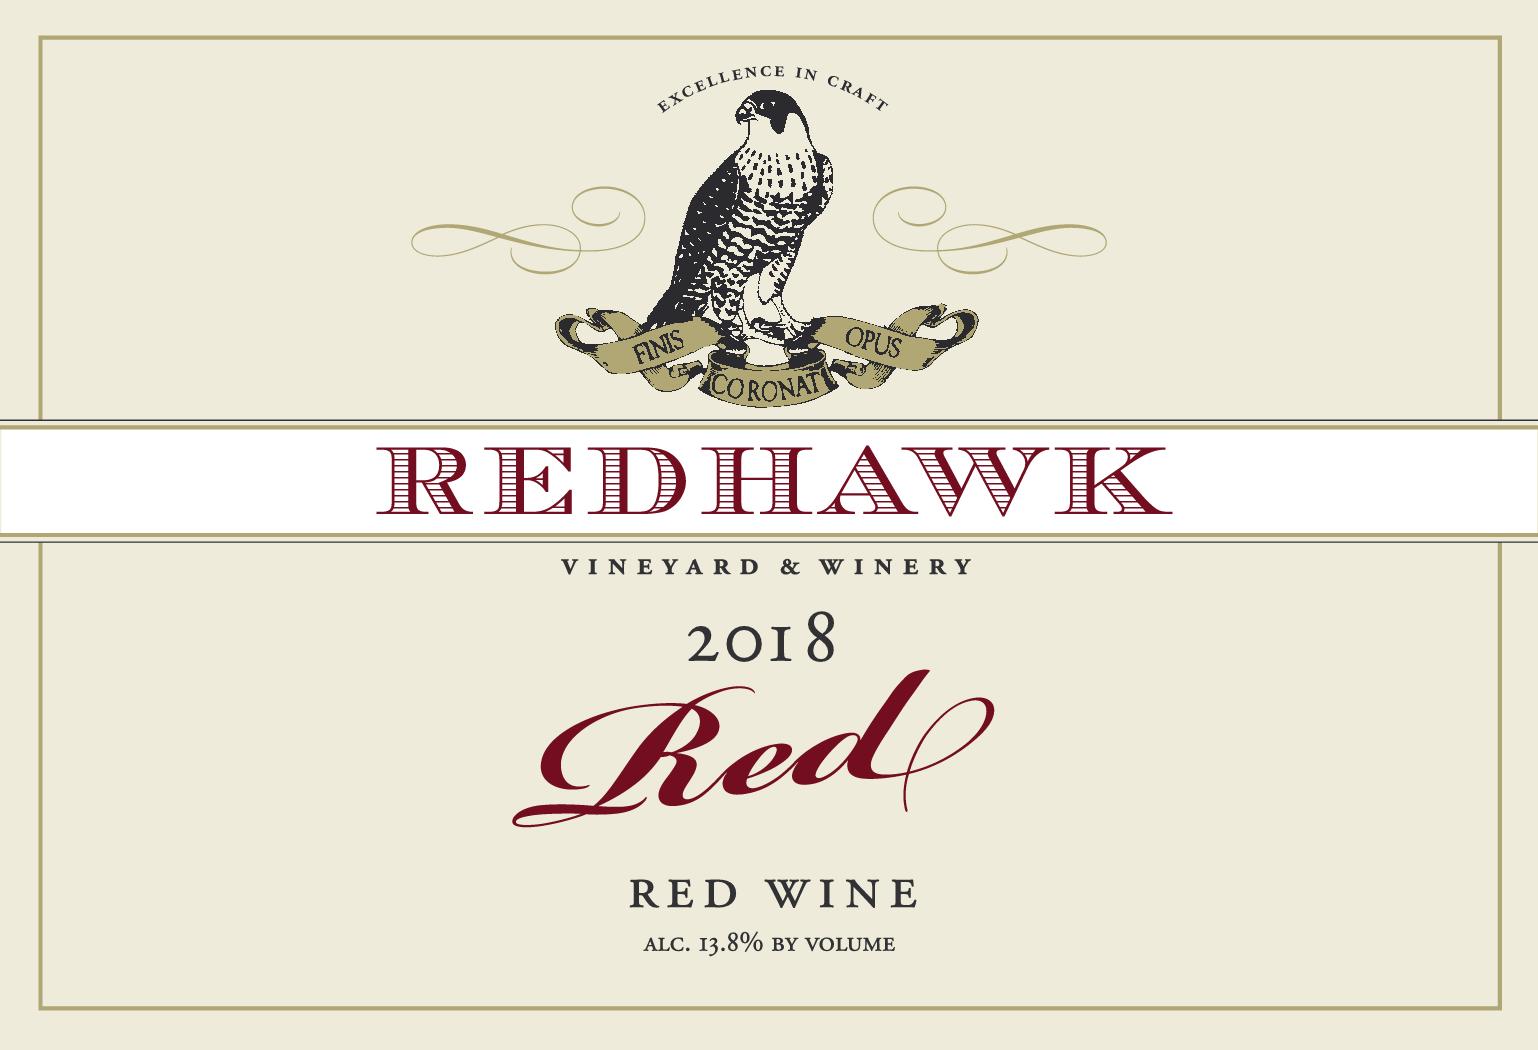 Product Image for 2022 Redhawk Red